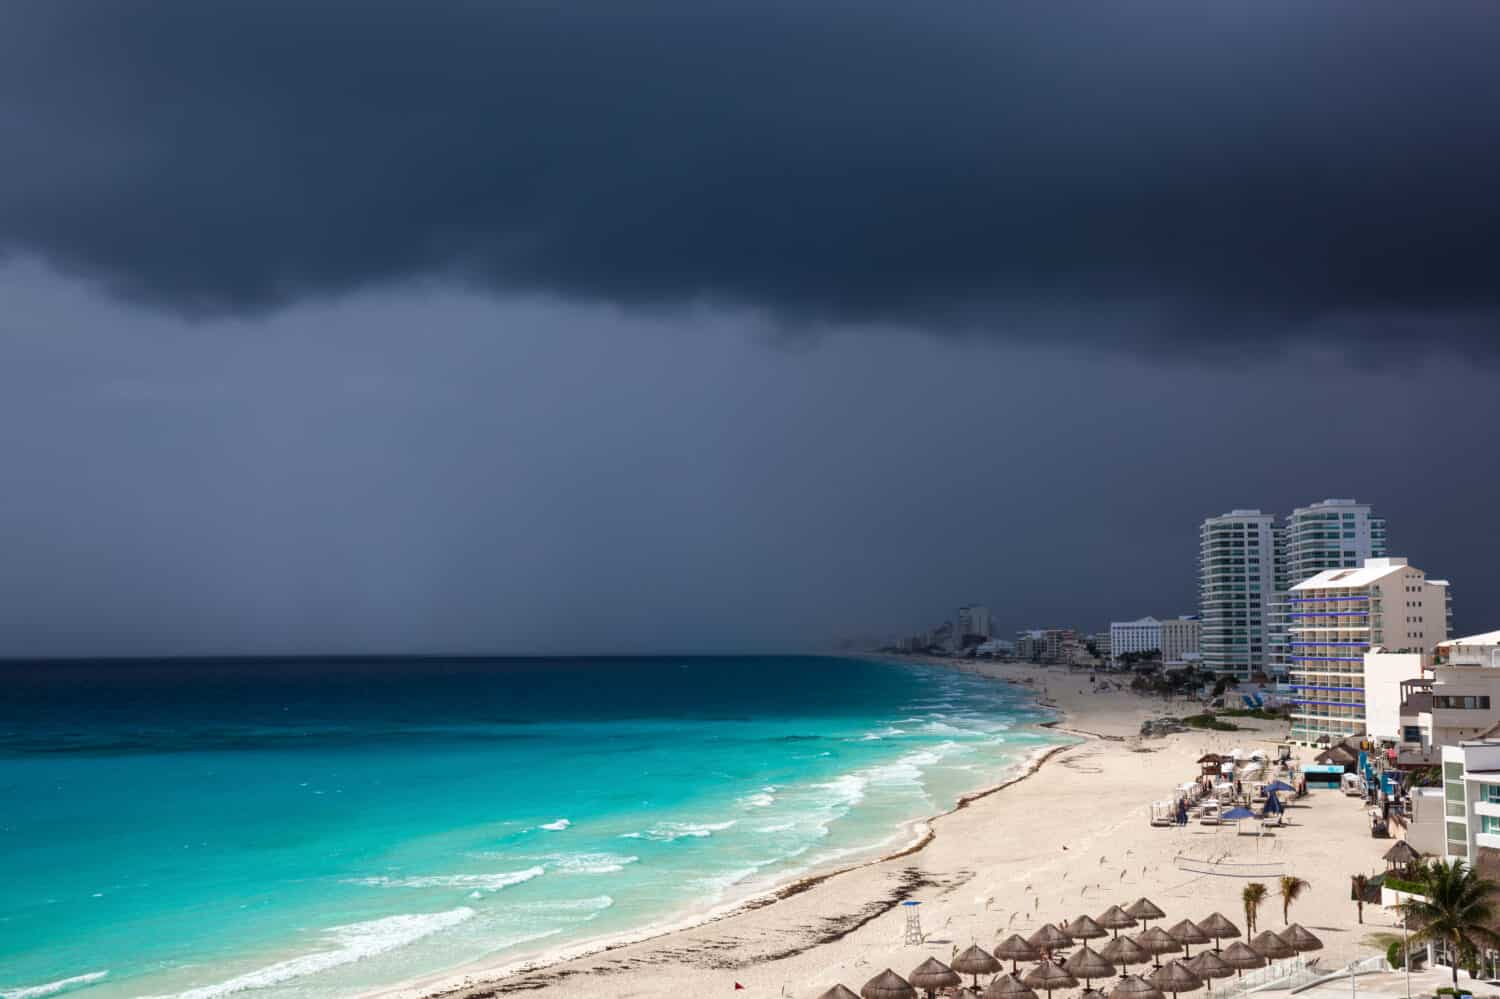 Stormy weather in Cancun, beautiful turquoise sea under dark blue clouds, view from above